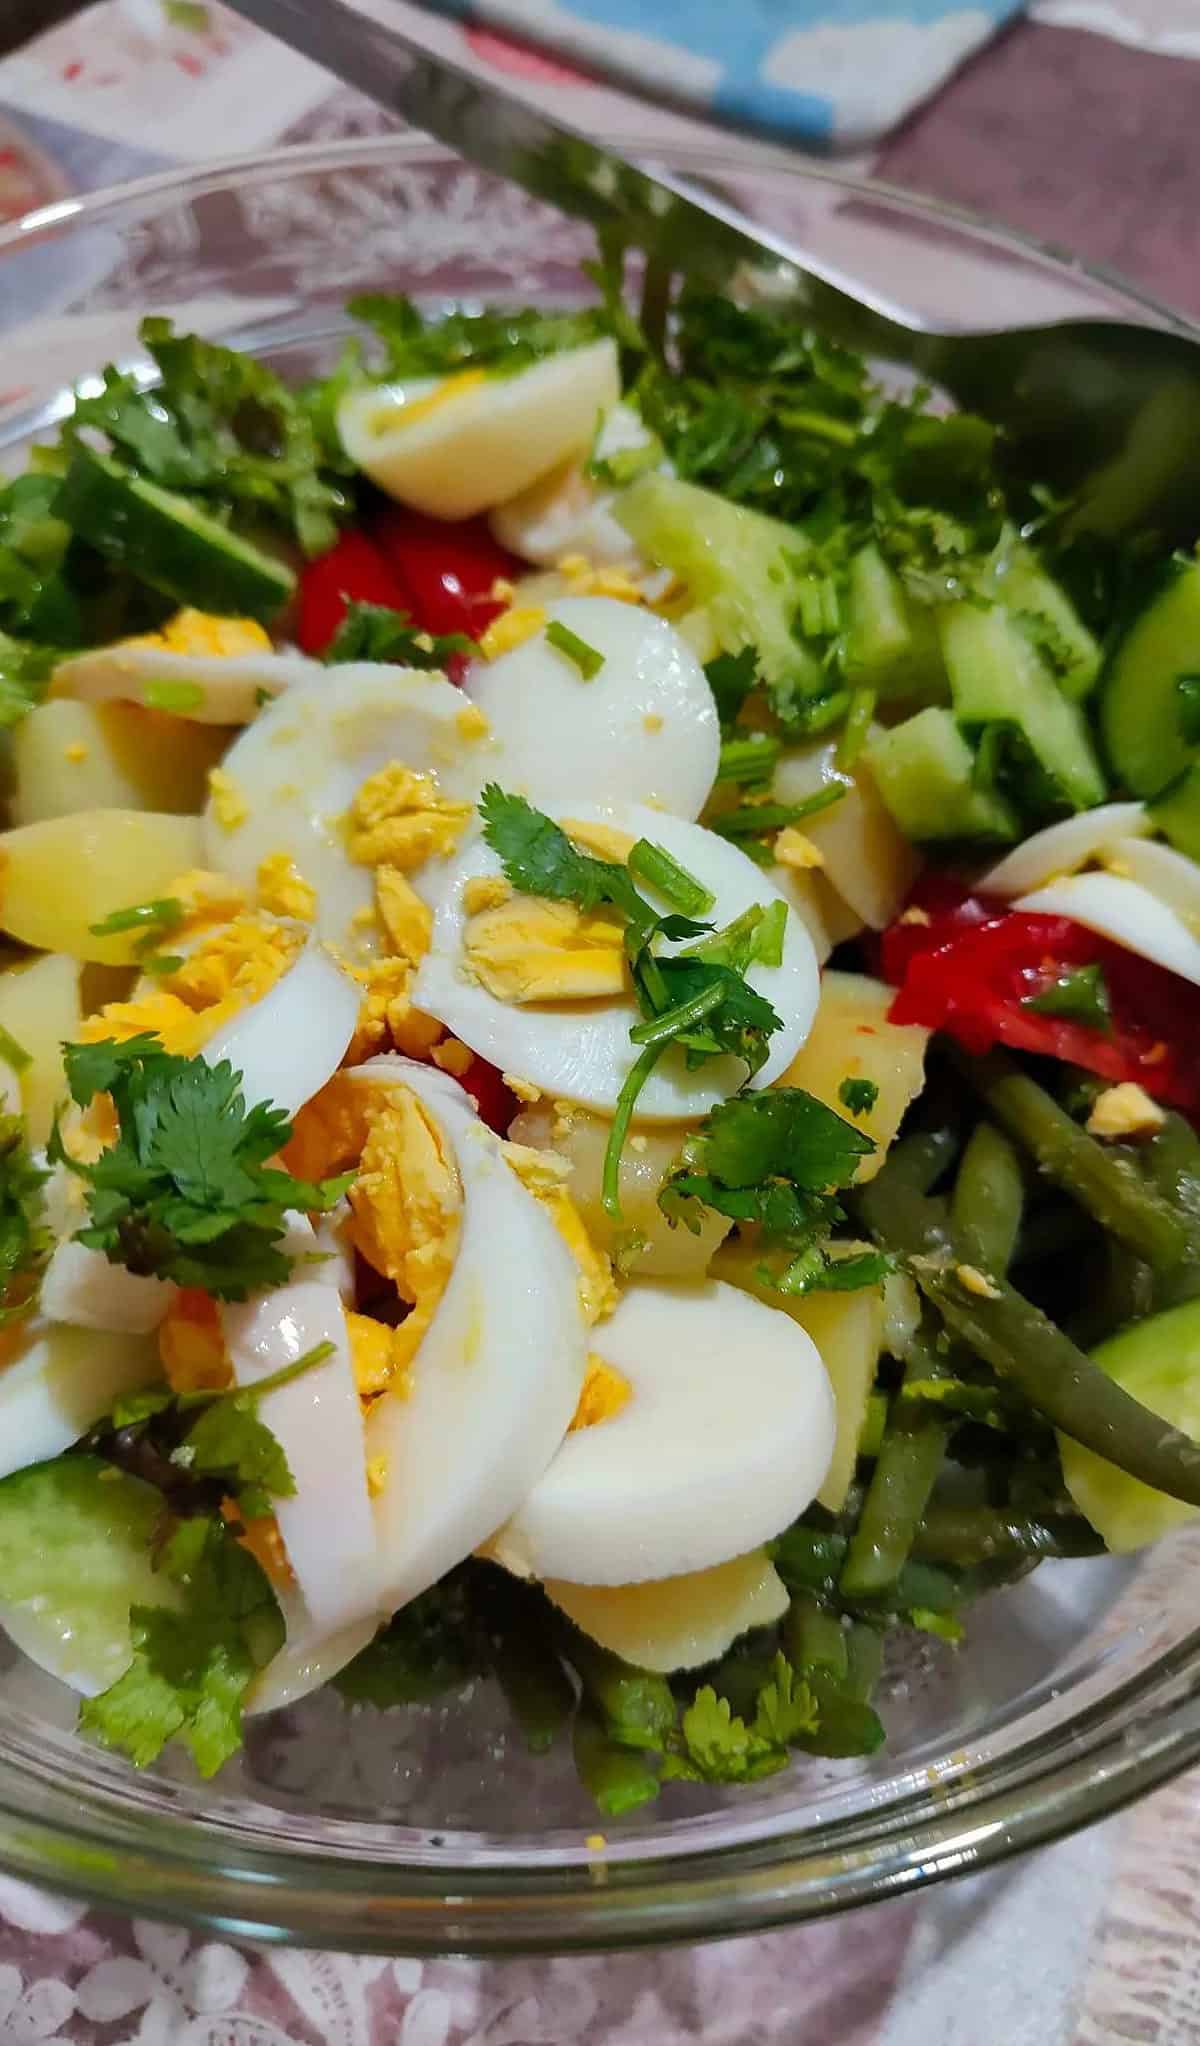  Give your taste buds a trip to Puglia with this traditional Italian salad.